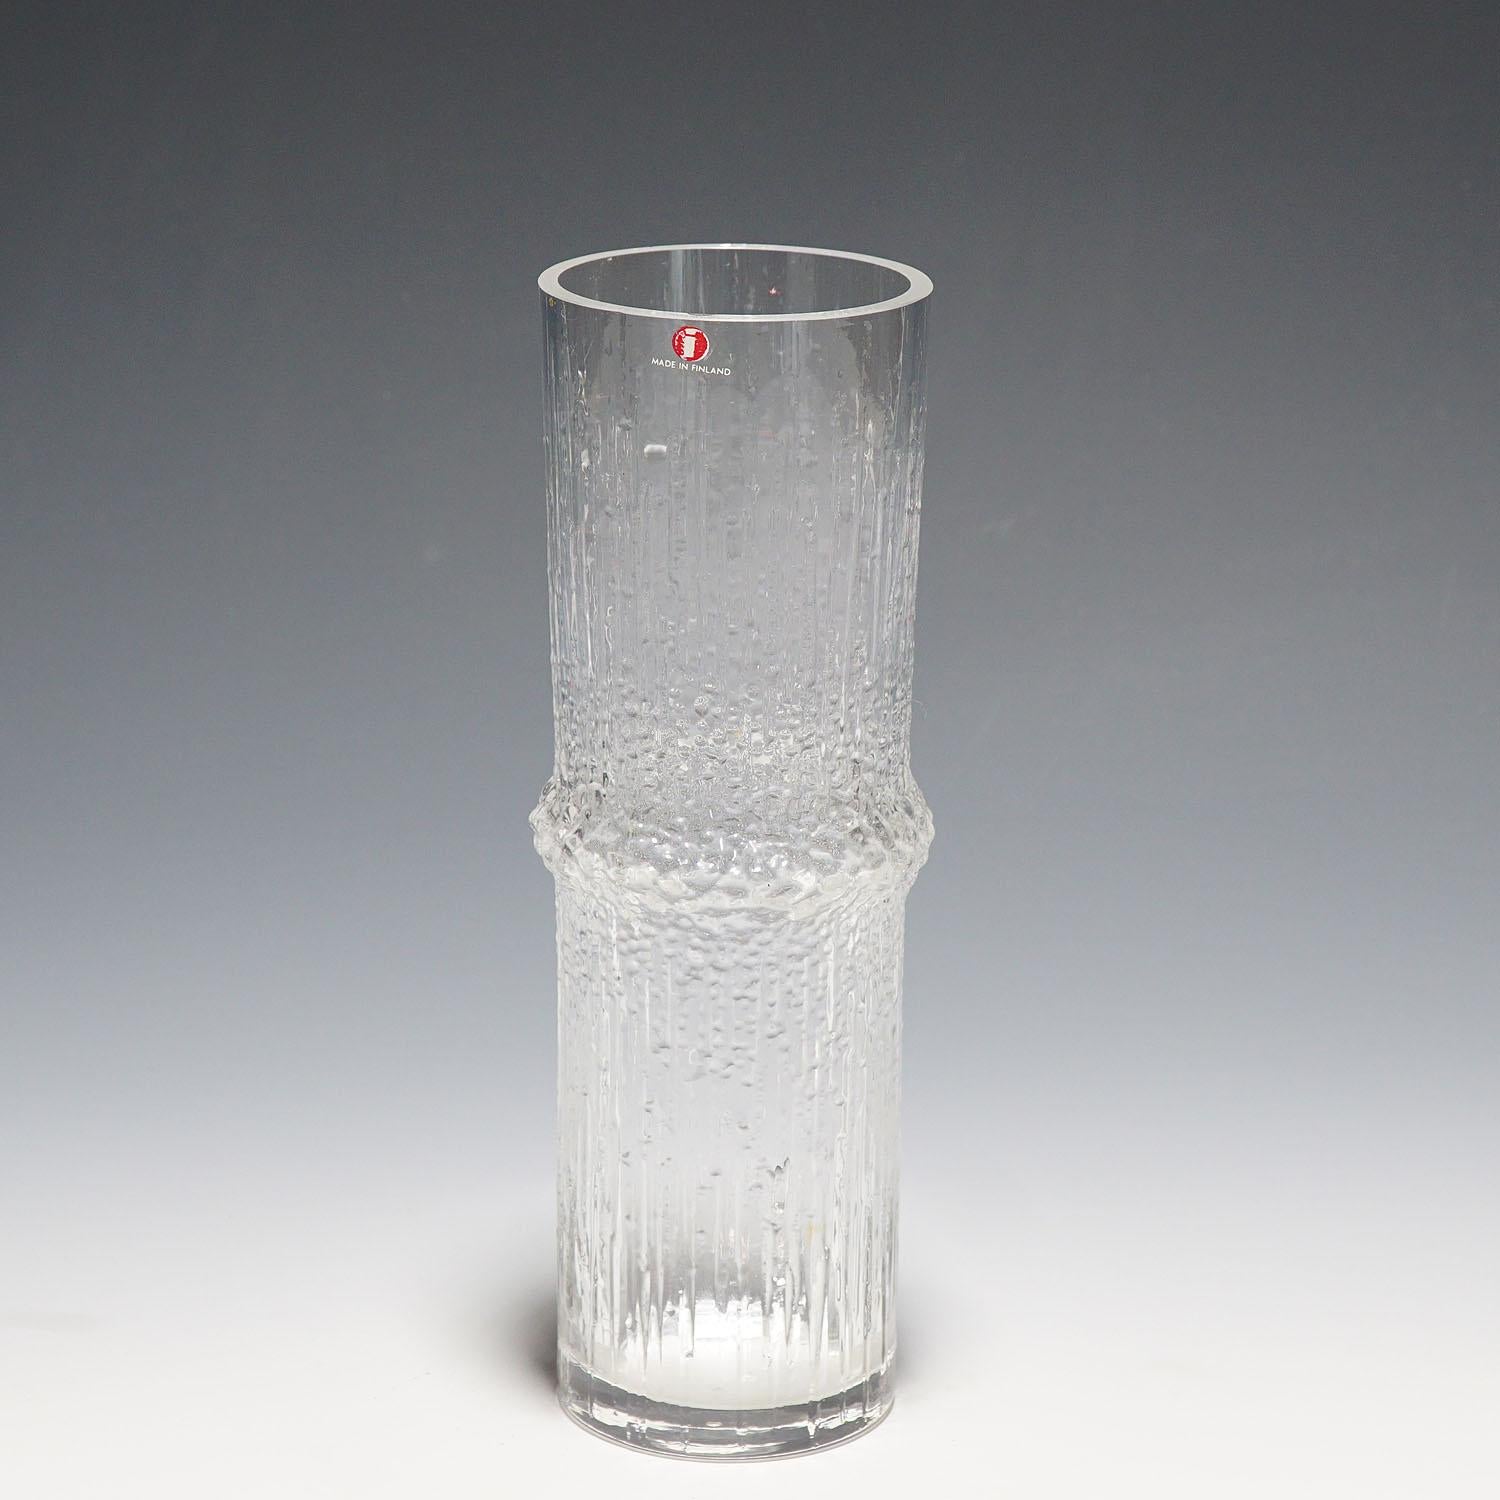 Vase 'Niva' by Tapio Wirkkala for Iittala, Finland 1970s

A vintage 'Niva' (Rushing stream) vase designed by Tapio Wirkkala for Iittala Glassworks in 1973. Mold blown crystal clear glass, marked with incised signature 'TW' on the base. An authentic